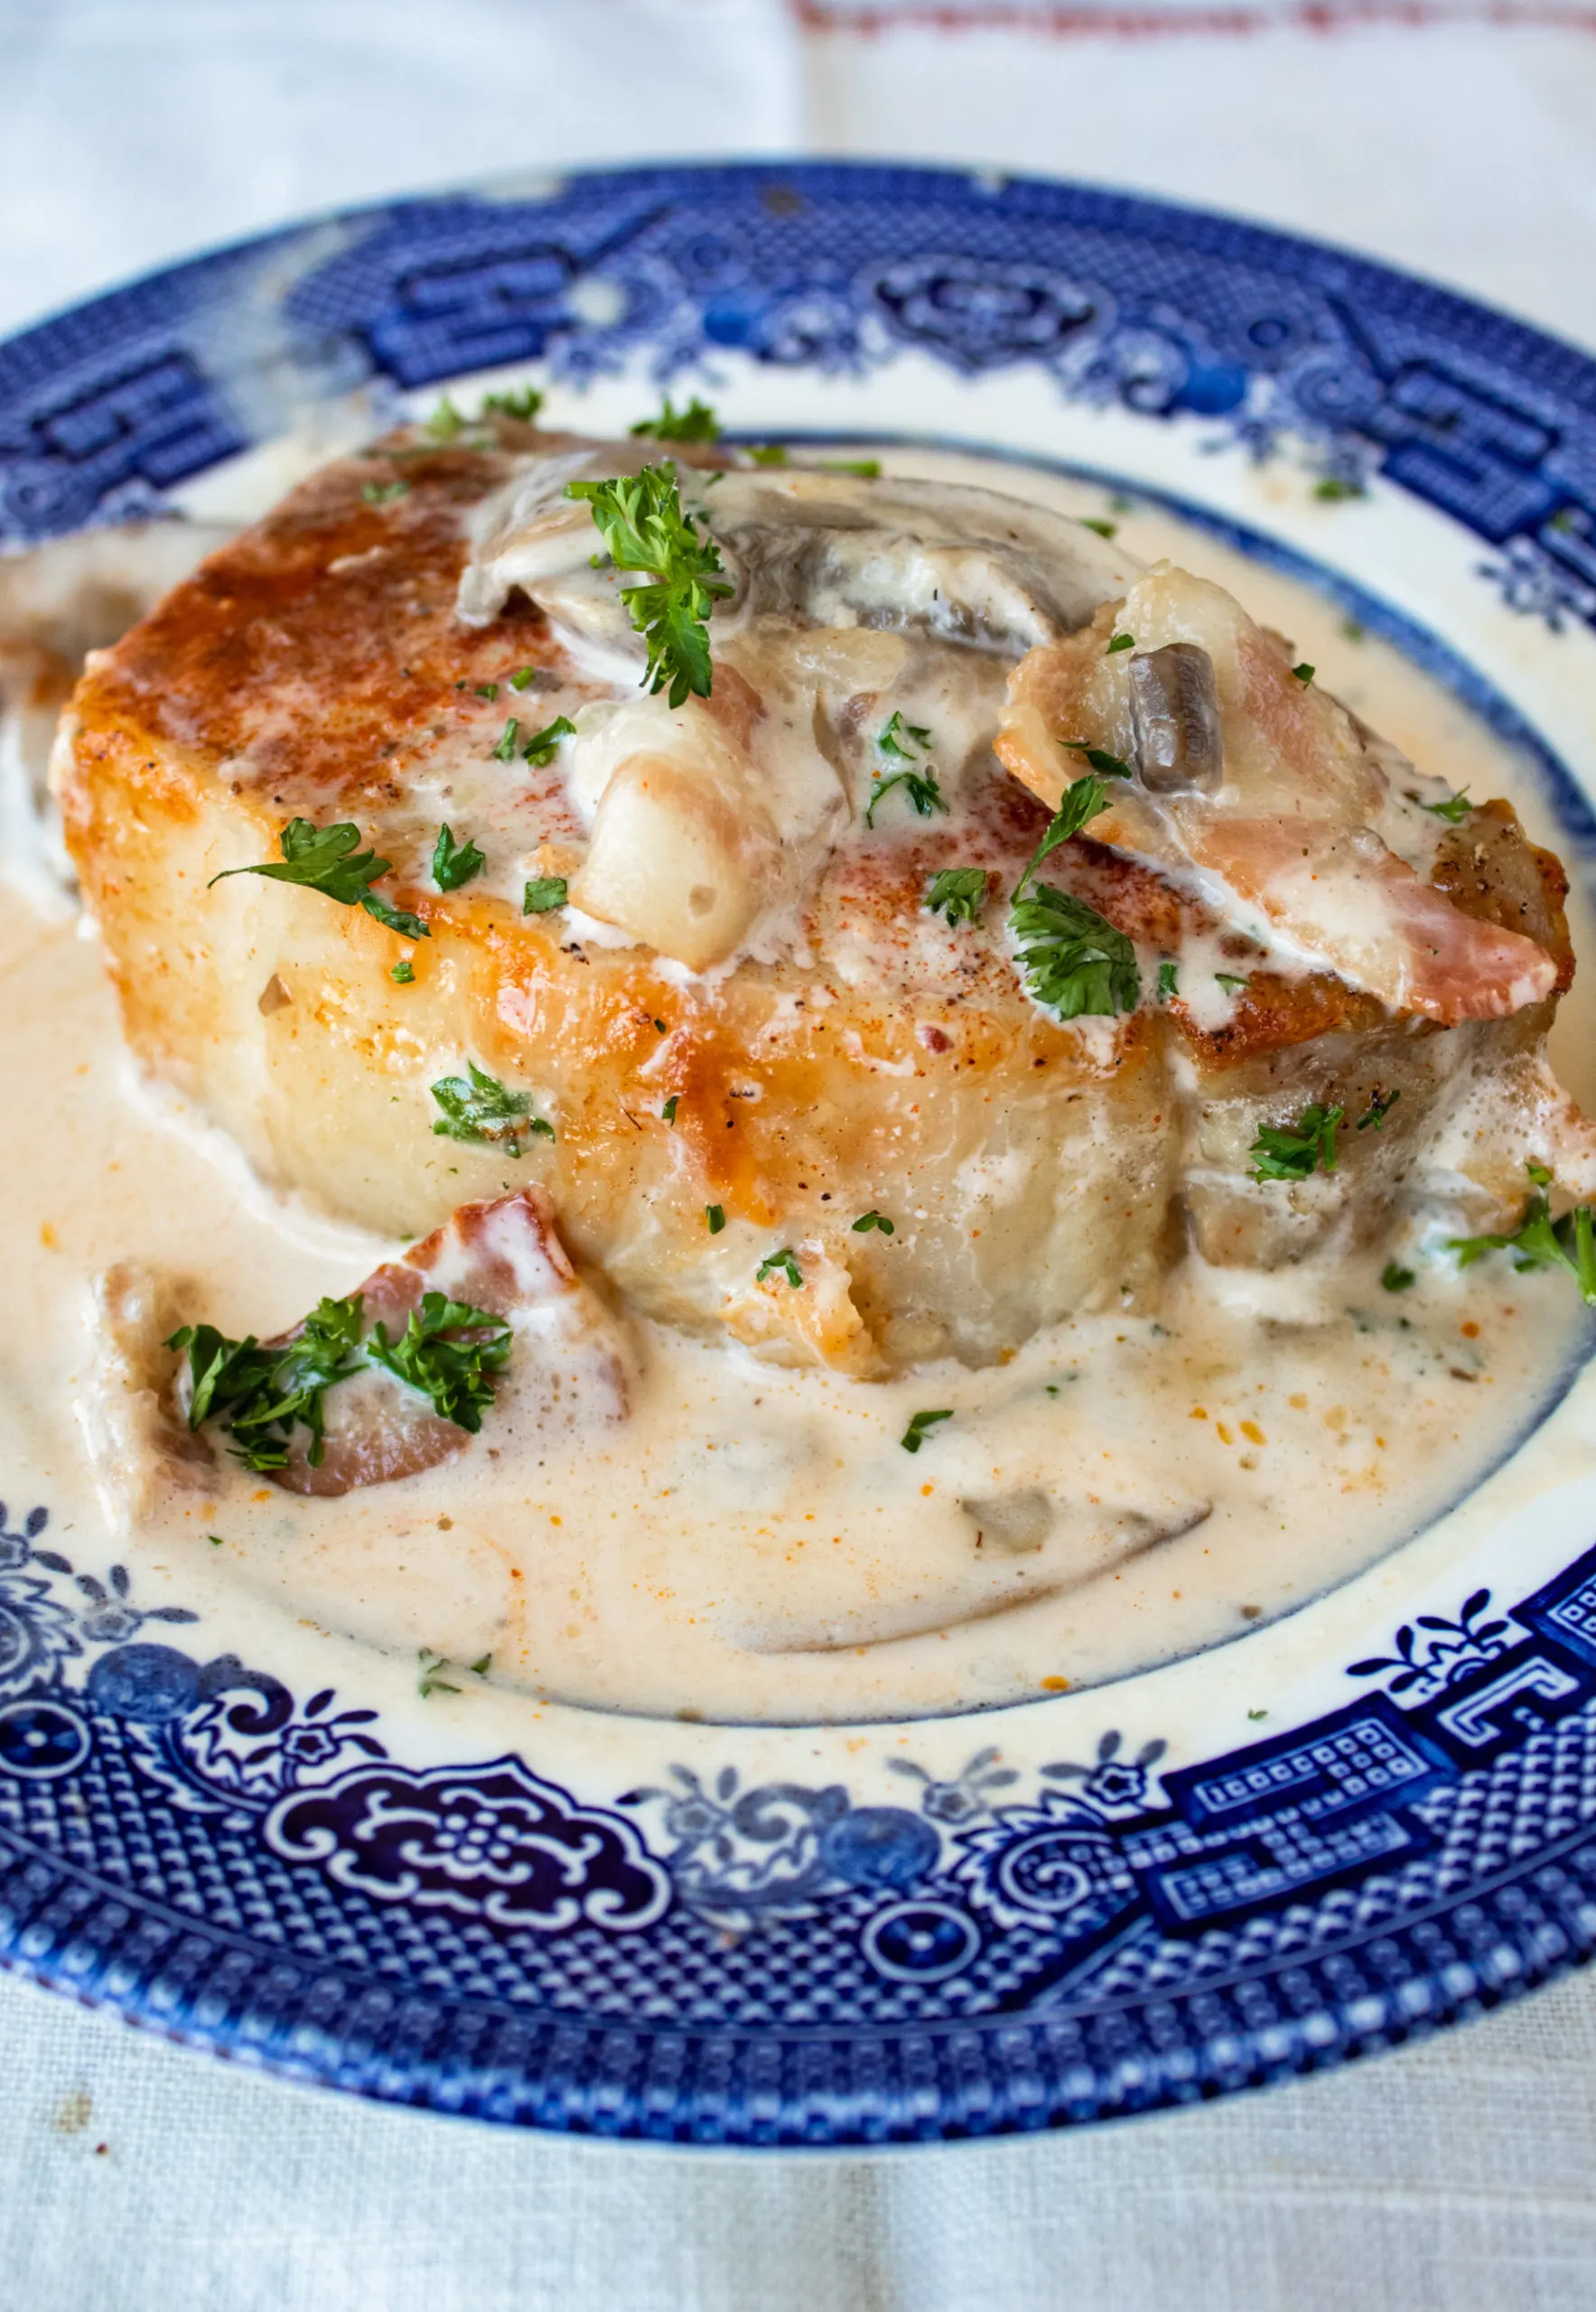 Smothered pork chop with bacon, mushrooms, and garlic in a cream sauce.